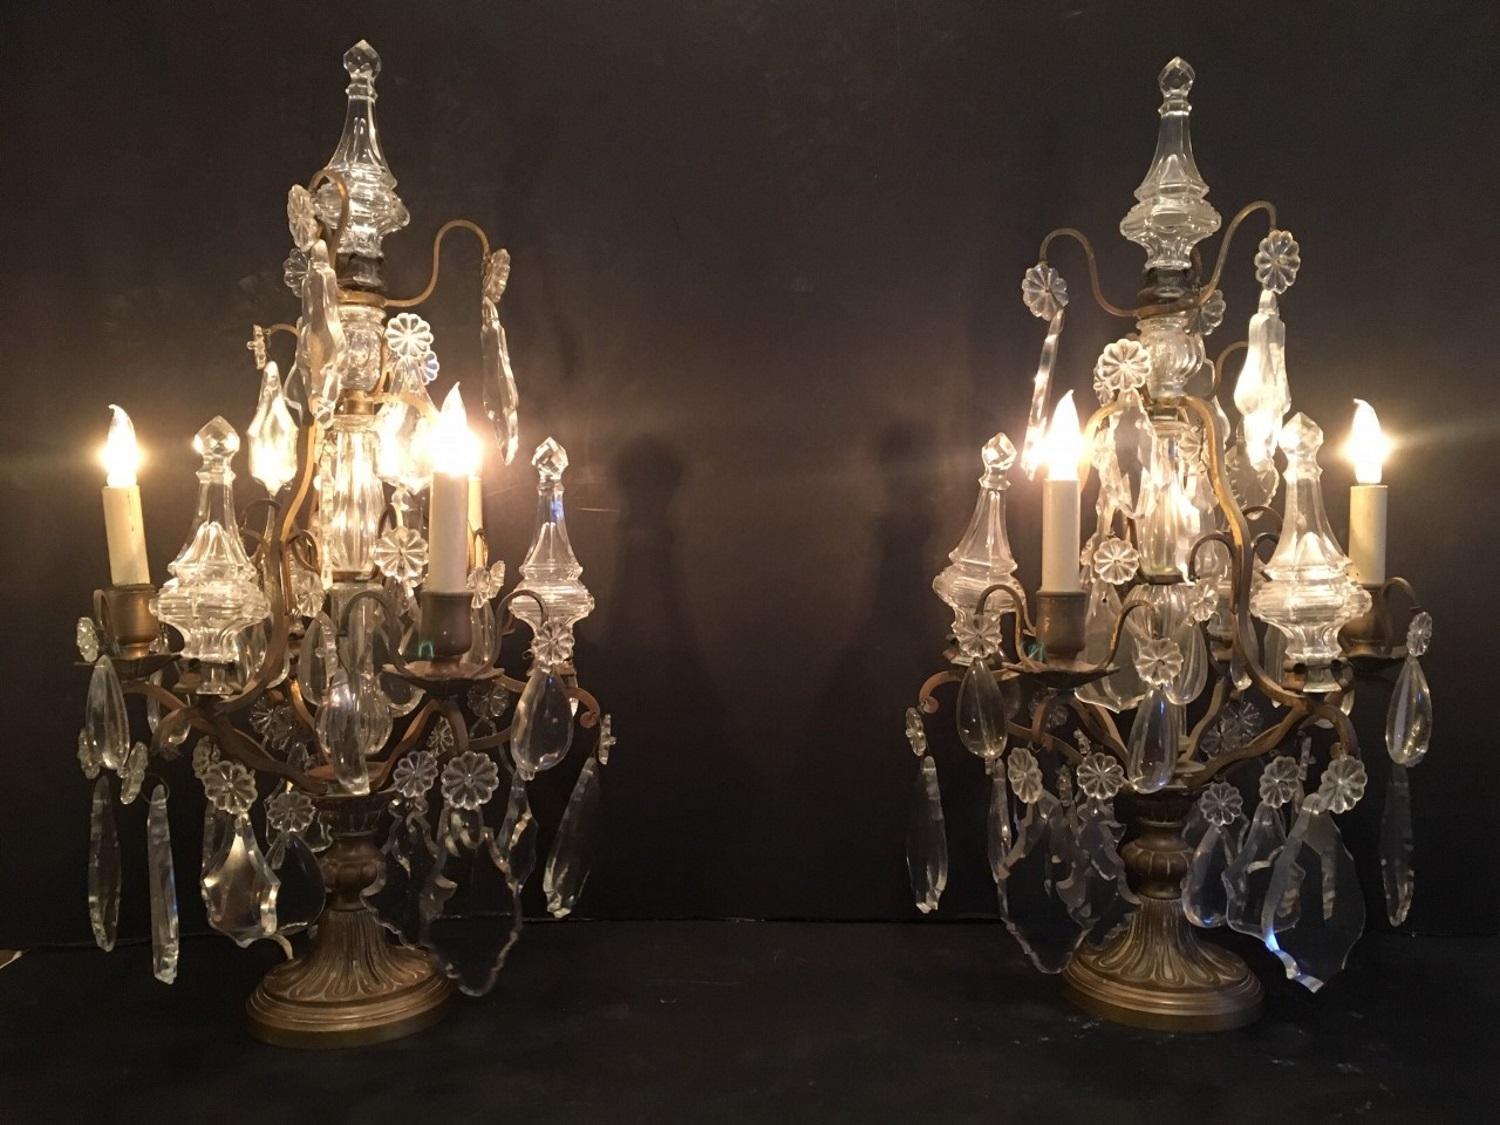 This pair of three light candelabras, crafted in fine cut glass,  were created in France at the turn of the century.  The stunning Girandoles have a clear crystal blown glass sections in the center. Bronze arms hold a beautiful array of clear